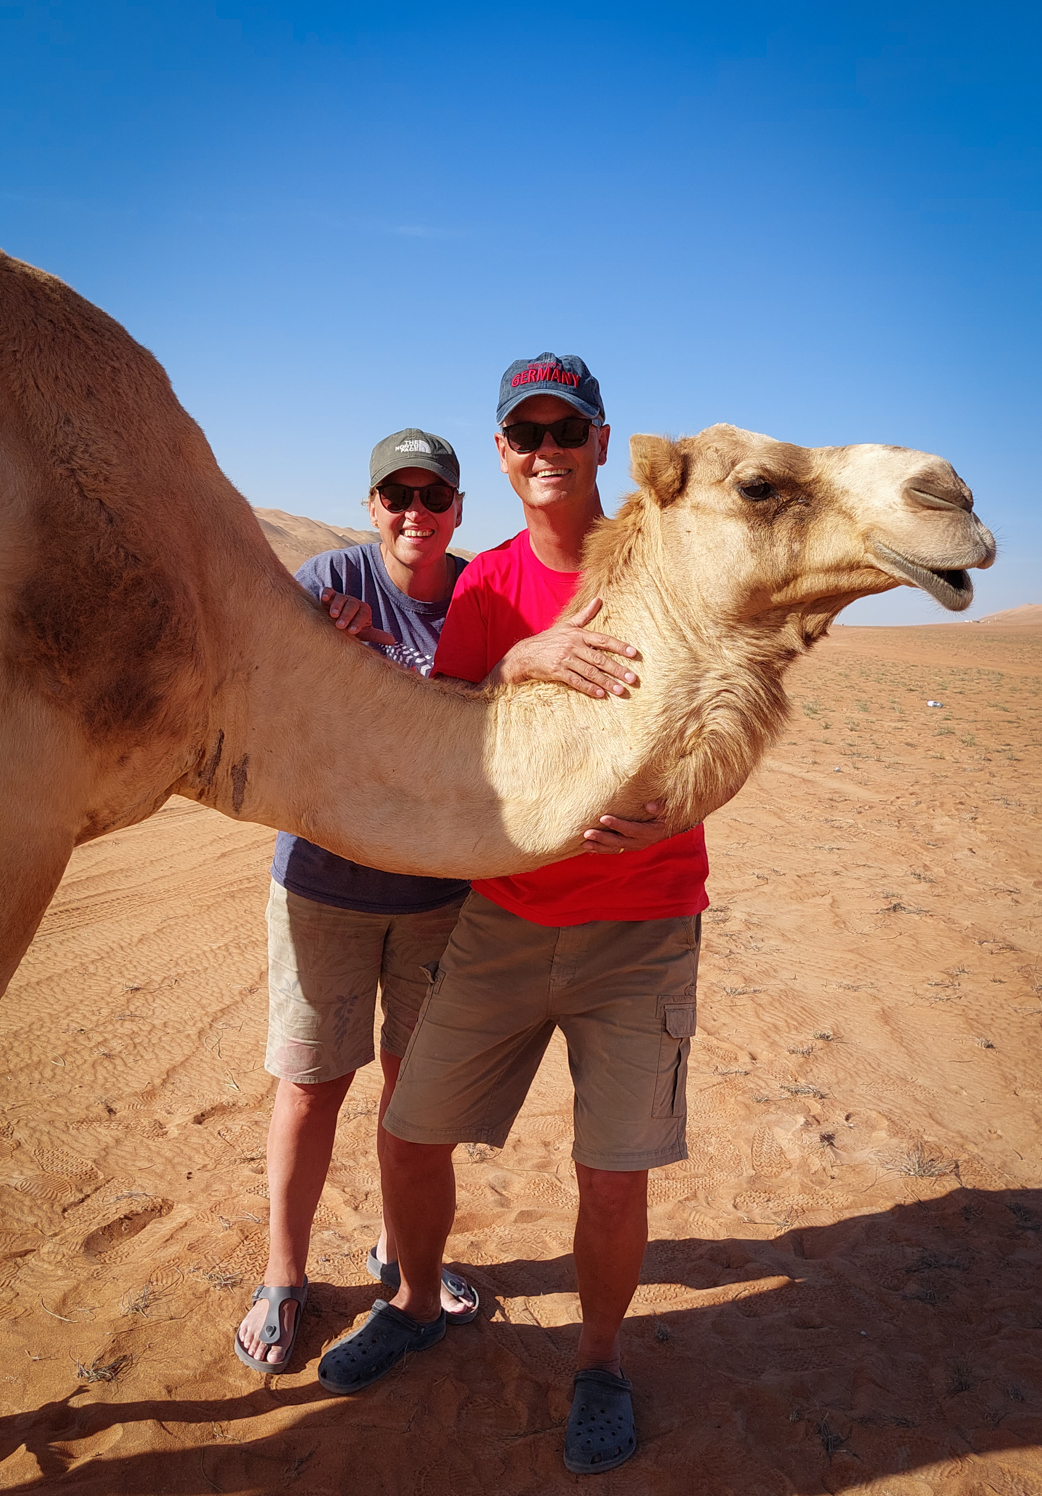 <span  class="uc_style_uc_tiles_grid_image_elementor_uc_items_attribute_title" style="color:#ffffff;">and of course: camels...</span>